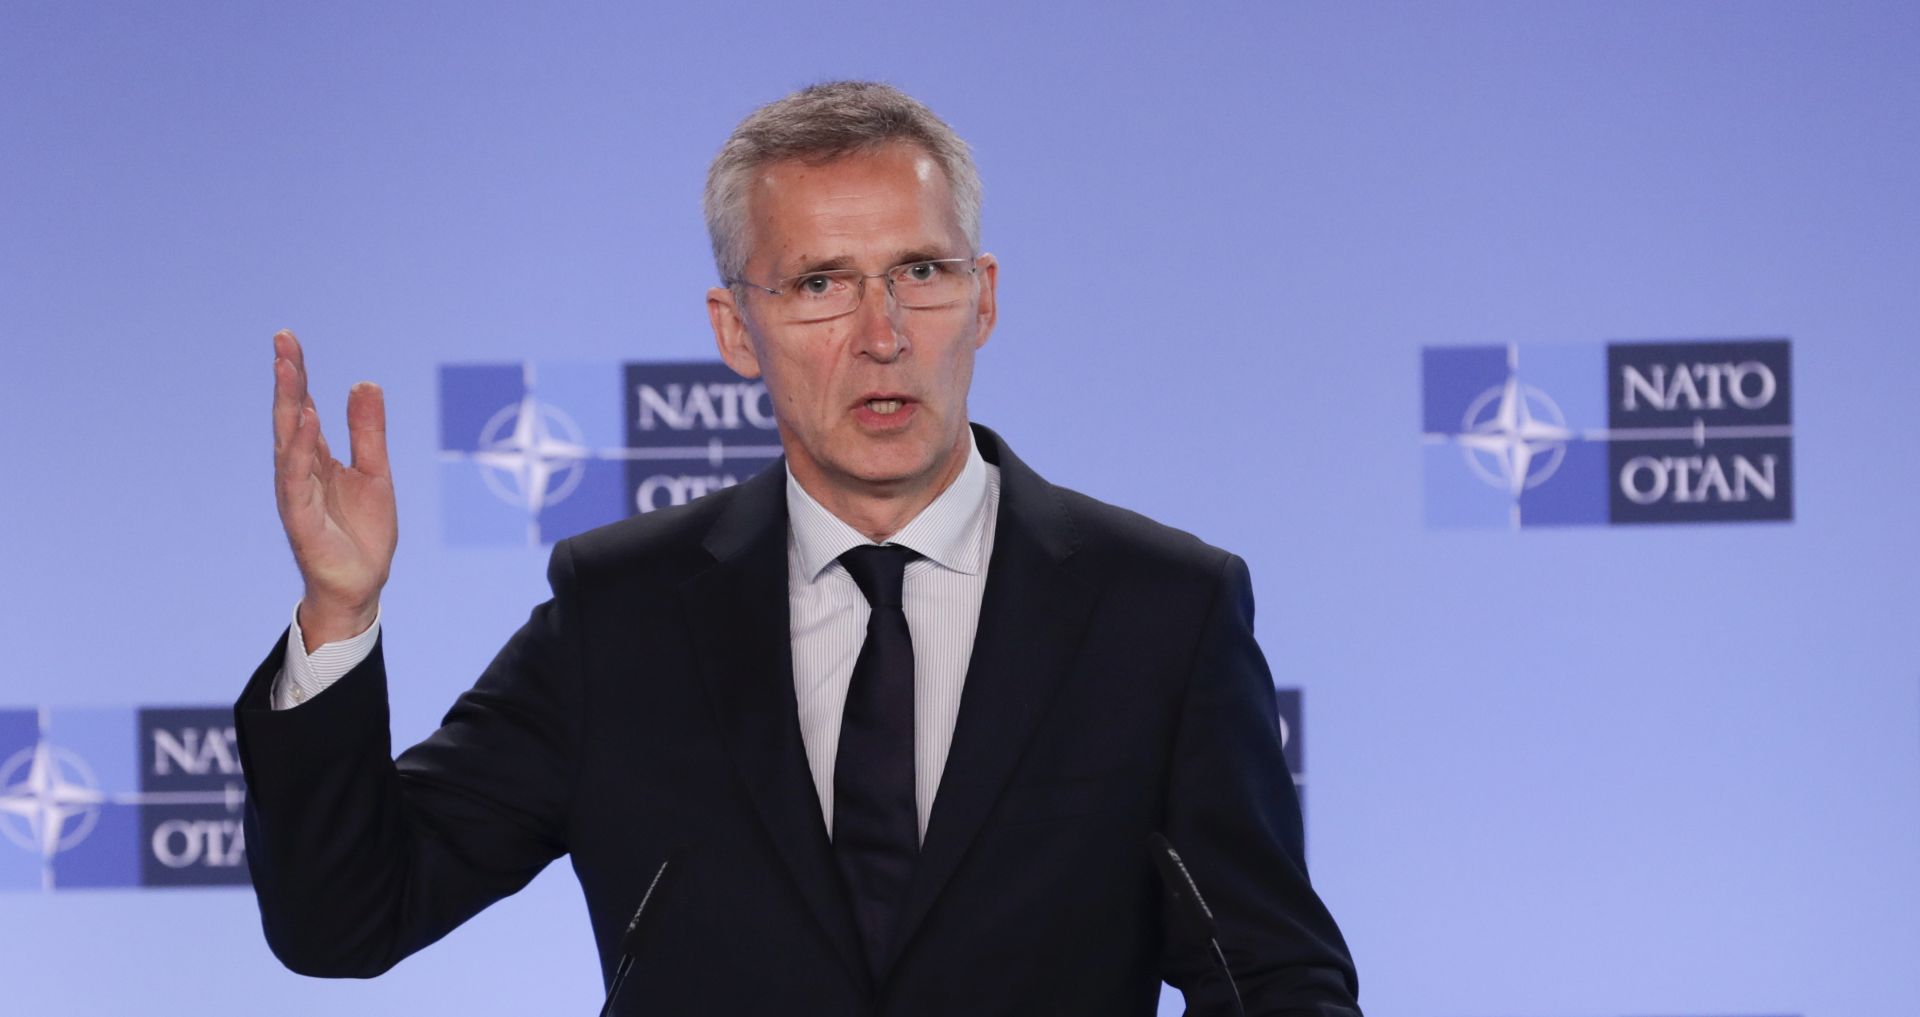 epa07696988 NATO Secretary General Jens Stoltenberg  gives a press briefing at the end of NATO-Russia Council in Brussels, Belgium, 05 July  2019. The meeting was mainly about the Intermediate-Range Nuclear Forces Treaty, or INF Treaty.  EPA/OLIVIER HOSLET